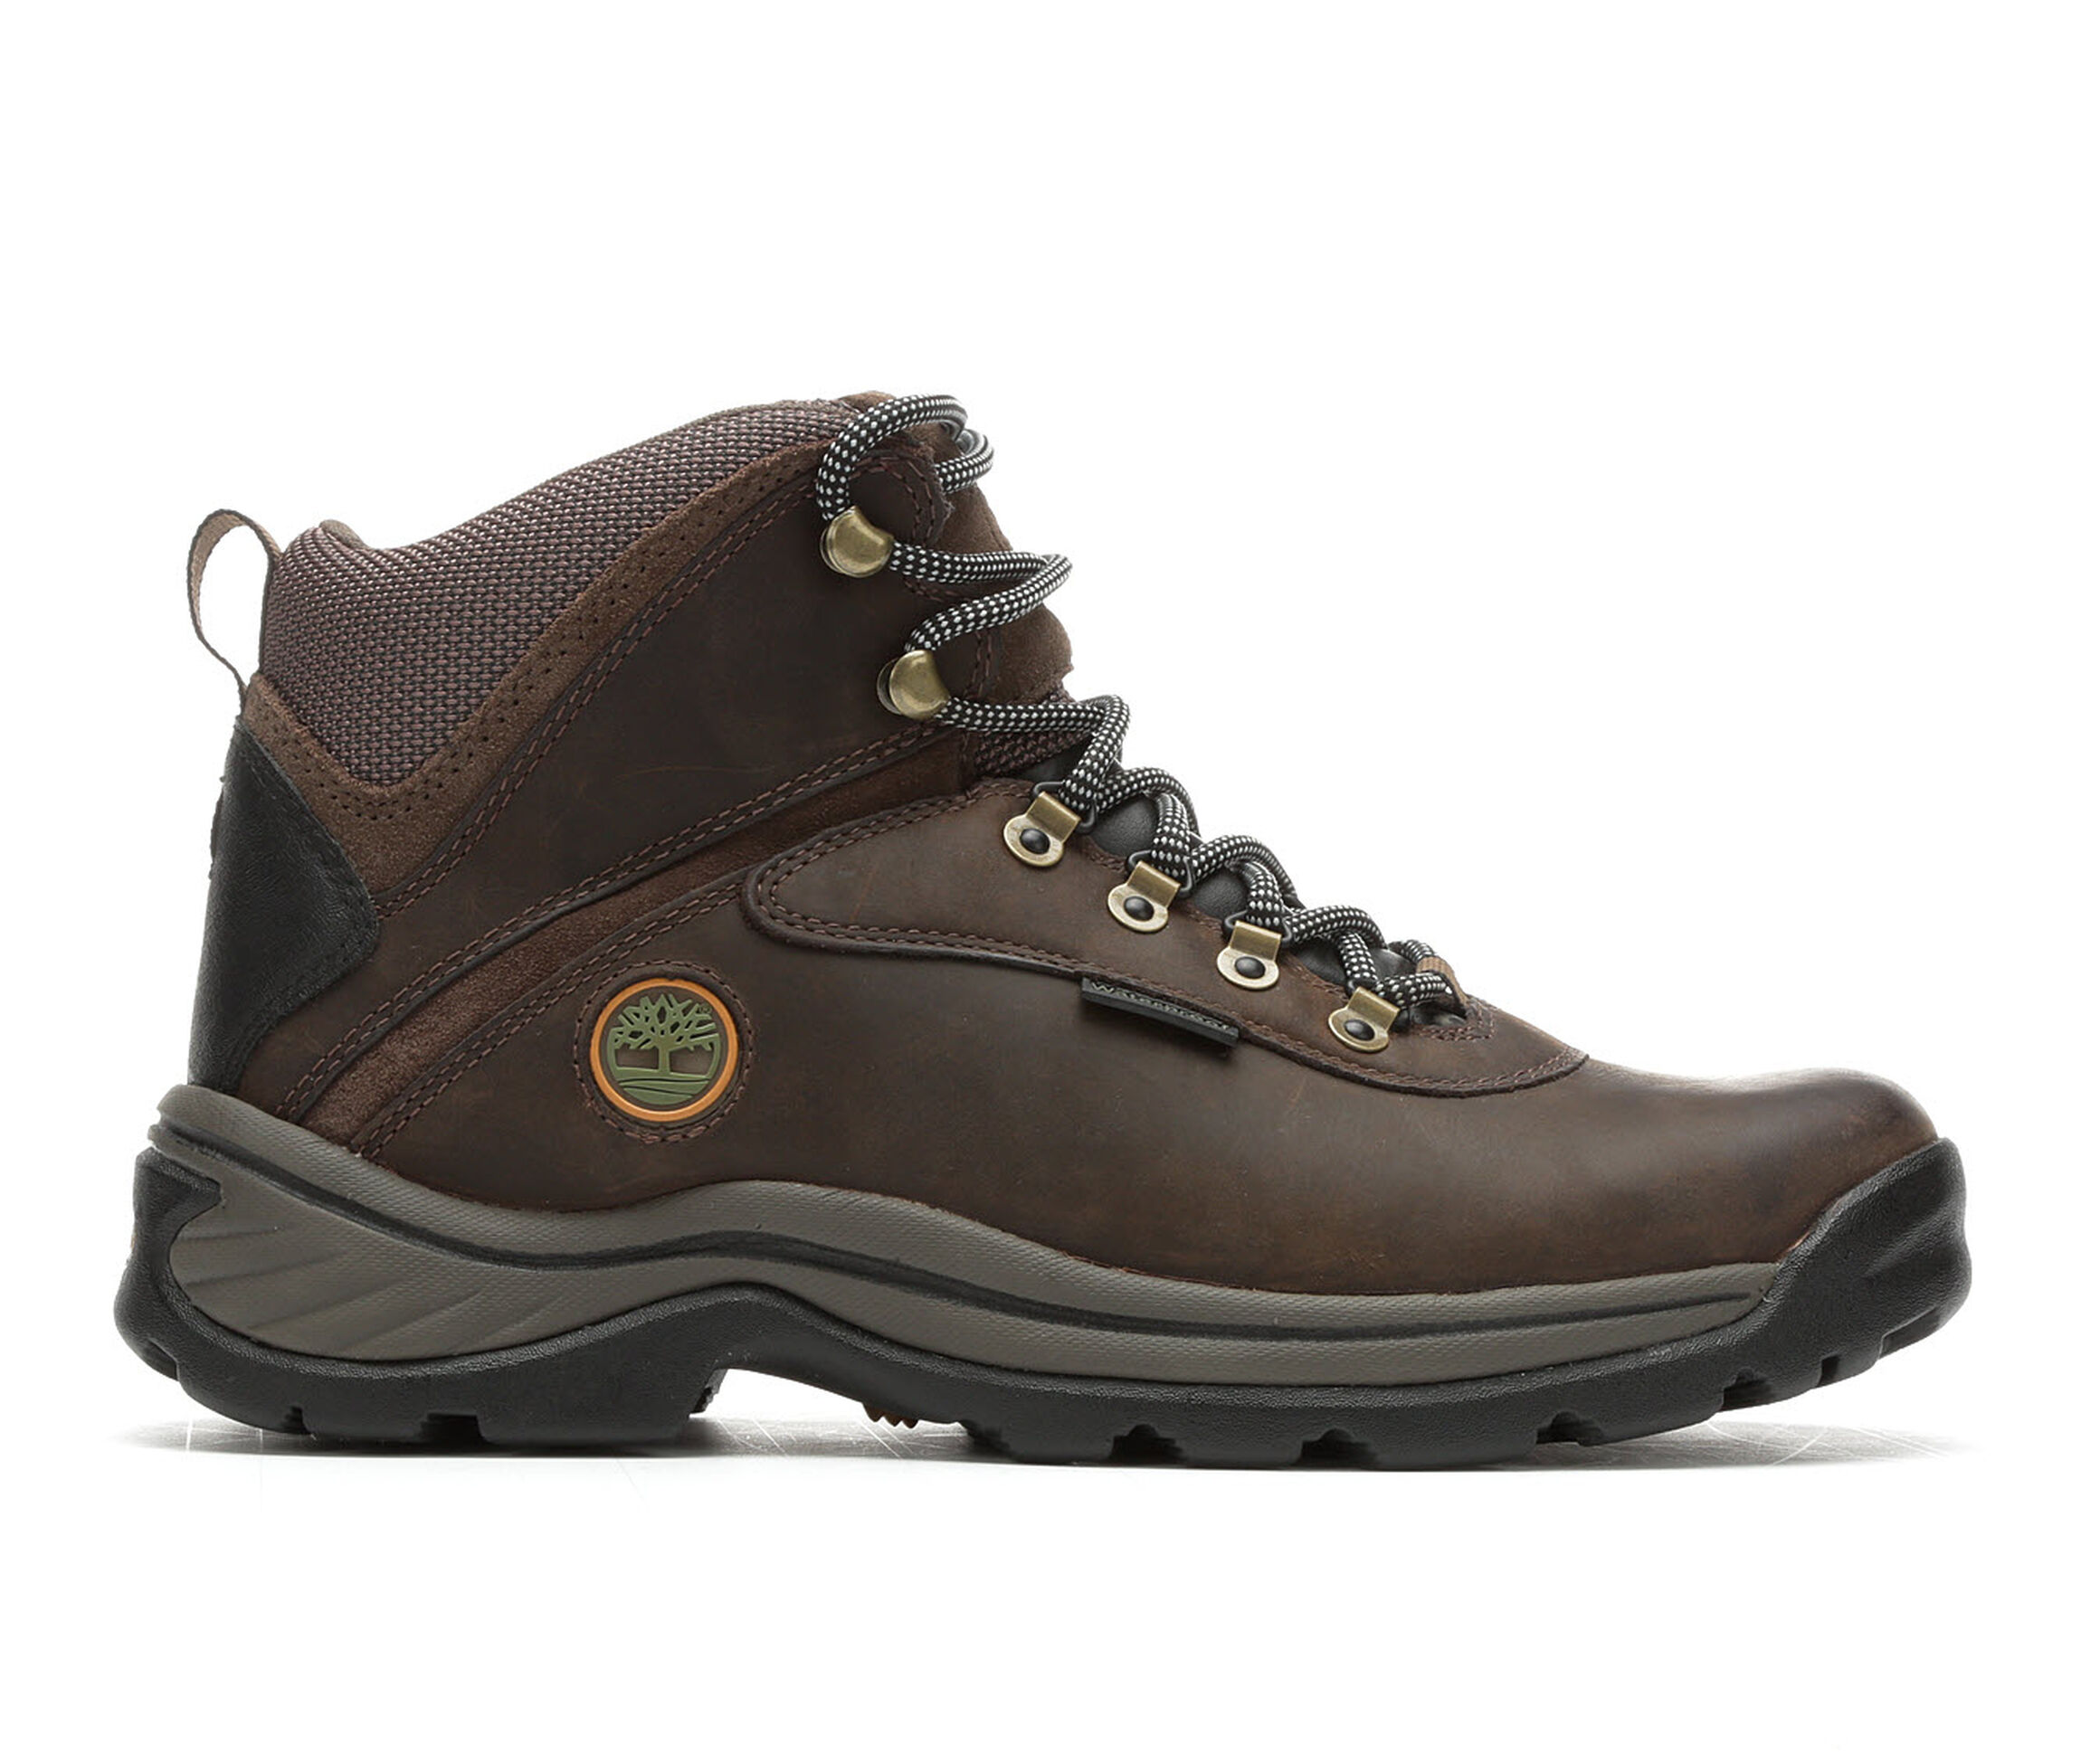 Men's Timberland Wide Width Boots and Shoes | Shoe Carnival